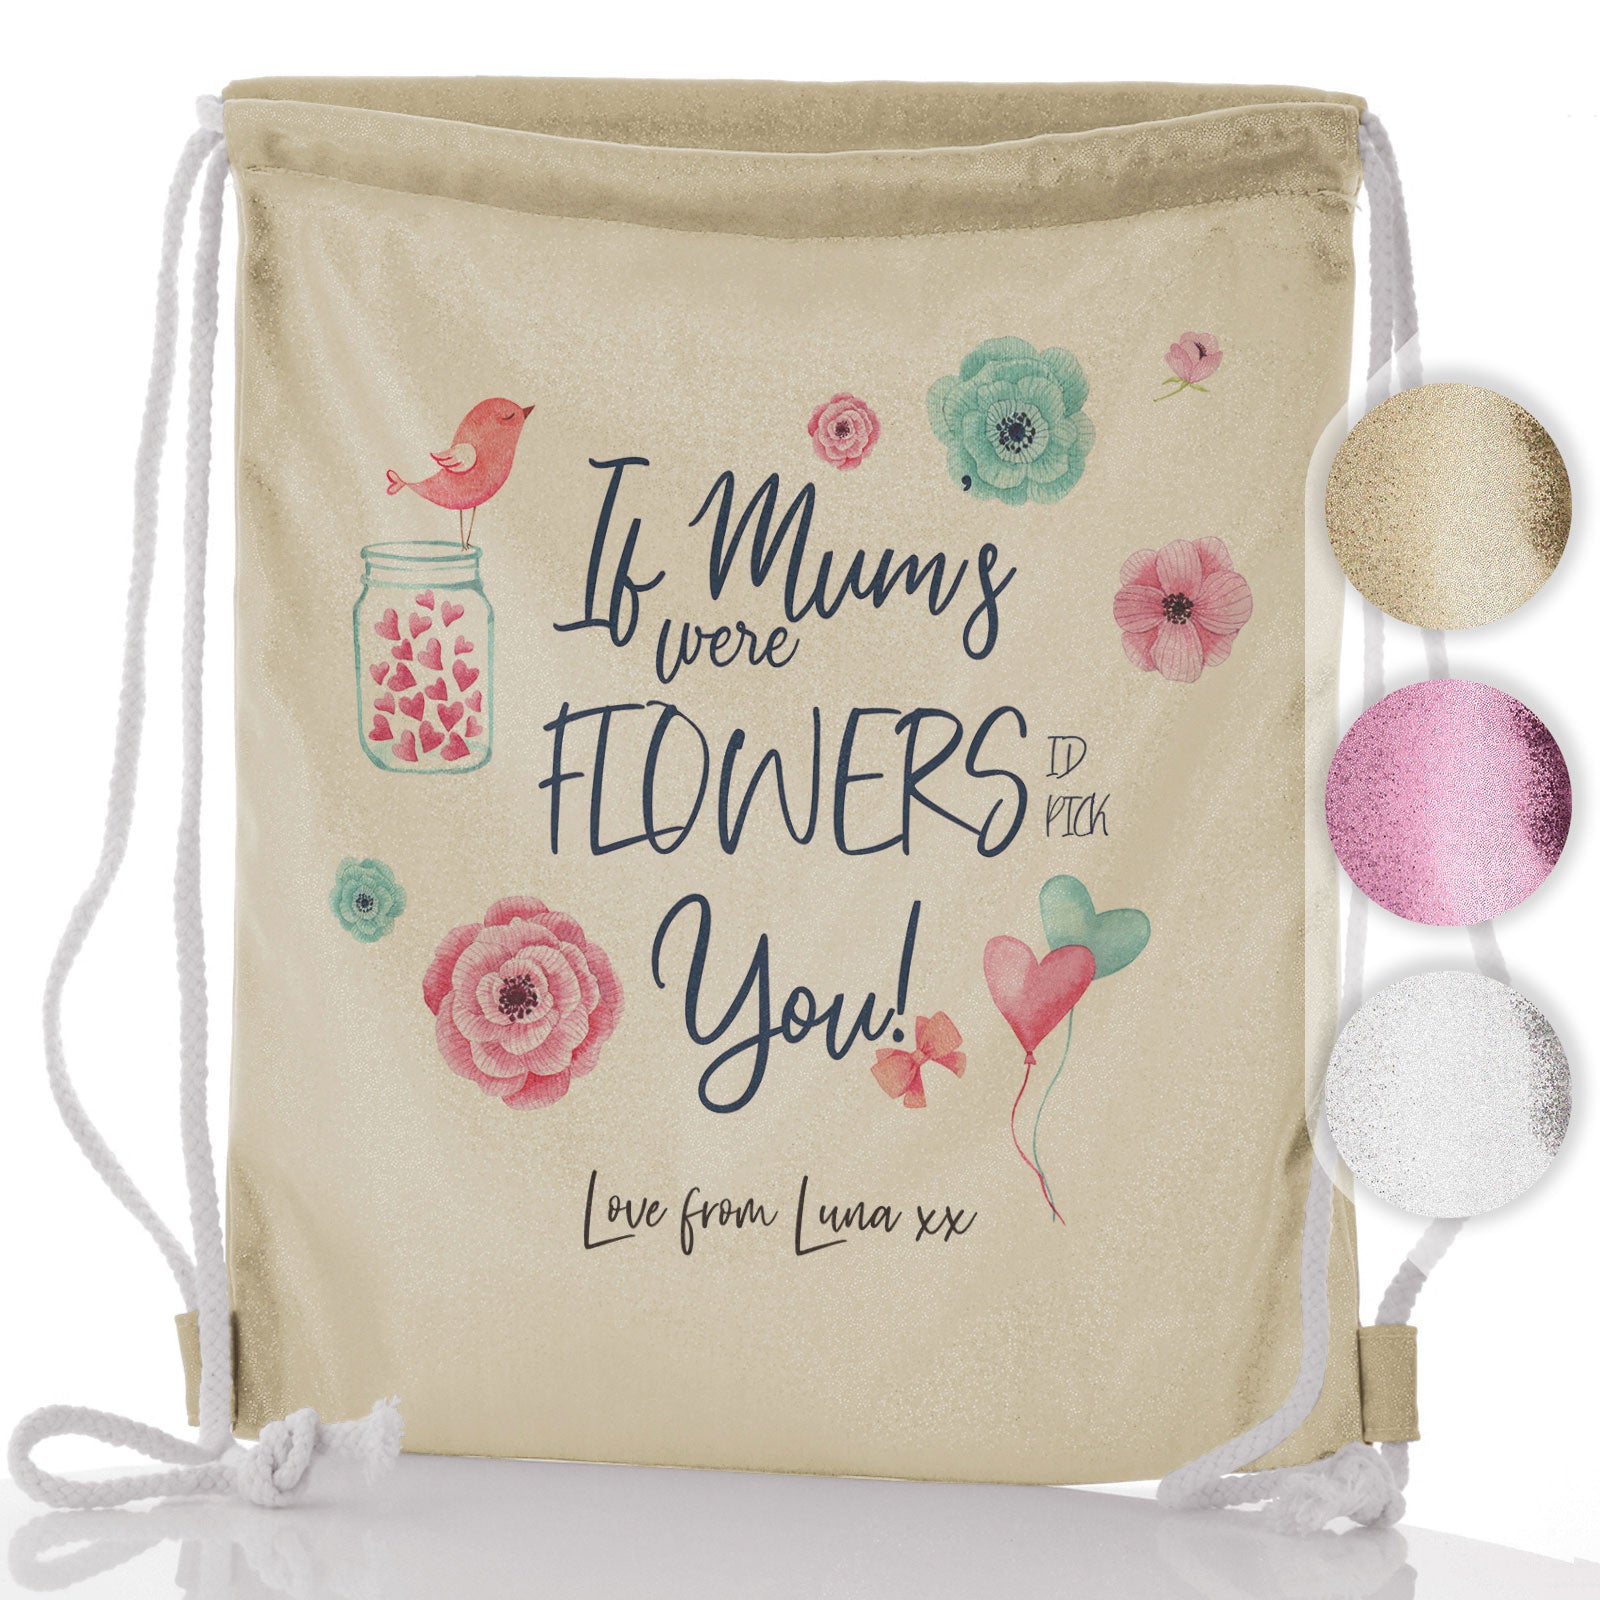 Personalised Glitter Drawstring Backpack with Stylish Text and Flowers Love Message